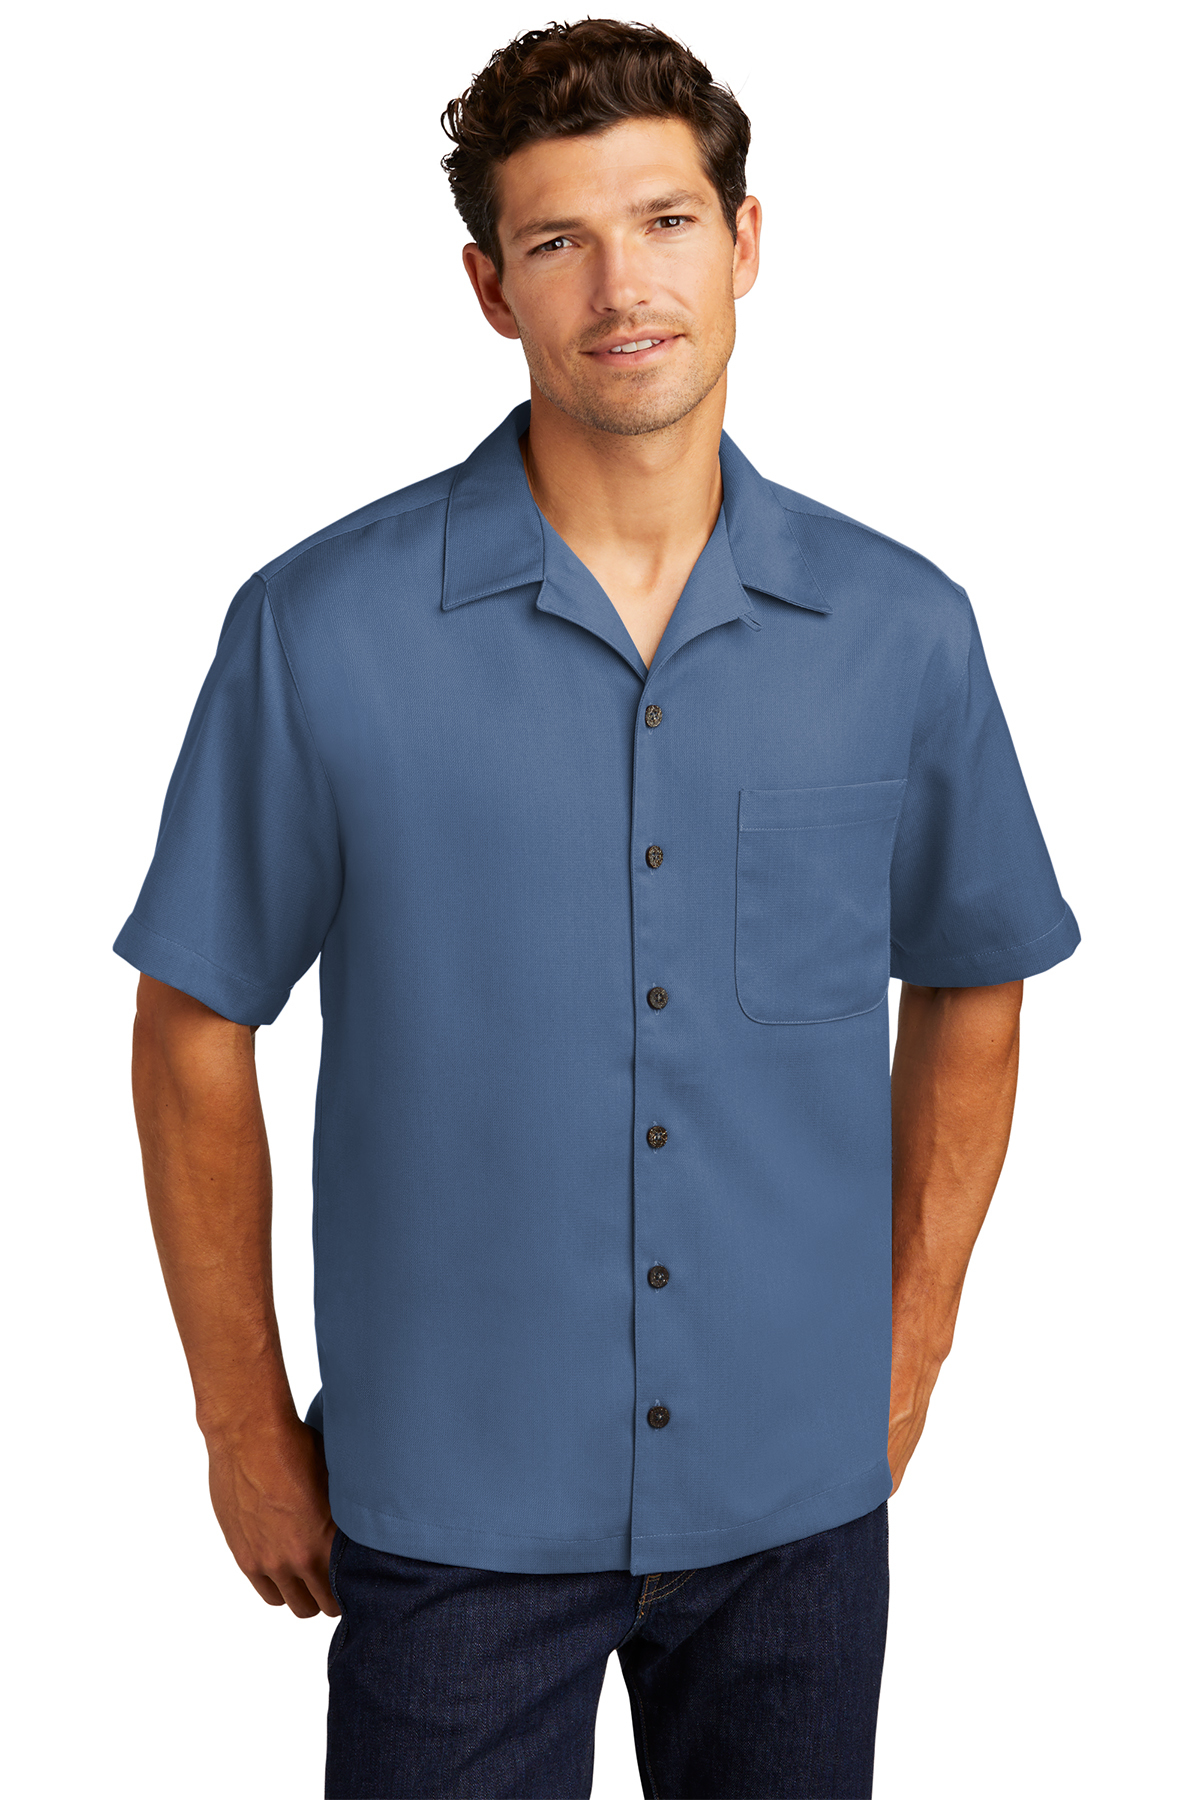 Port Authority Easy Care Camp Shirt | Product | SanMar